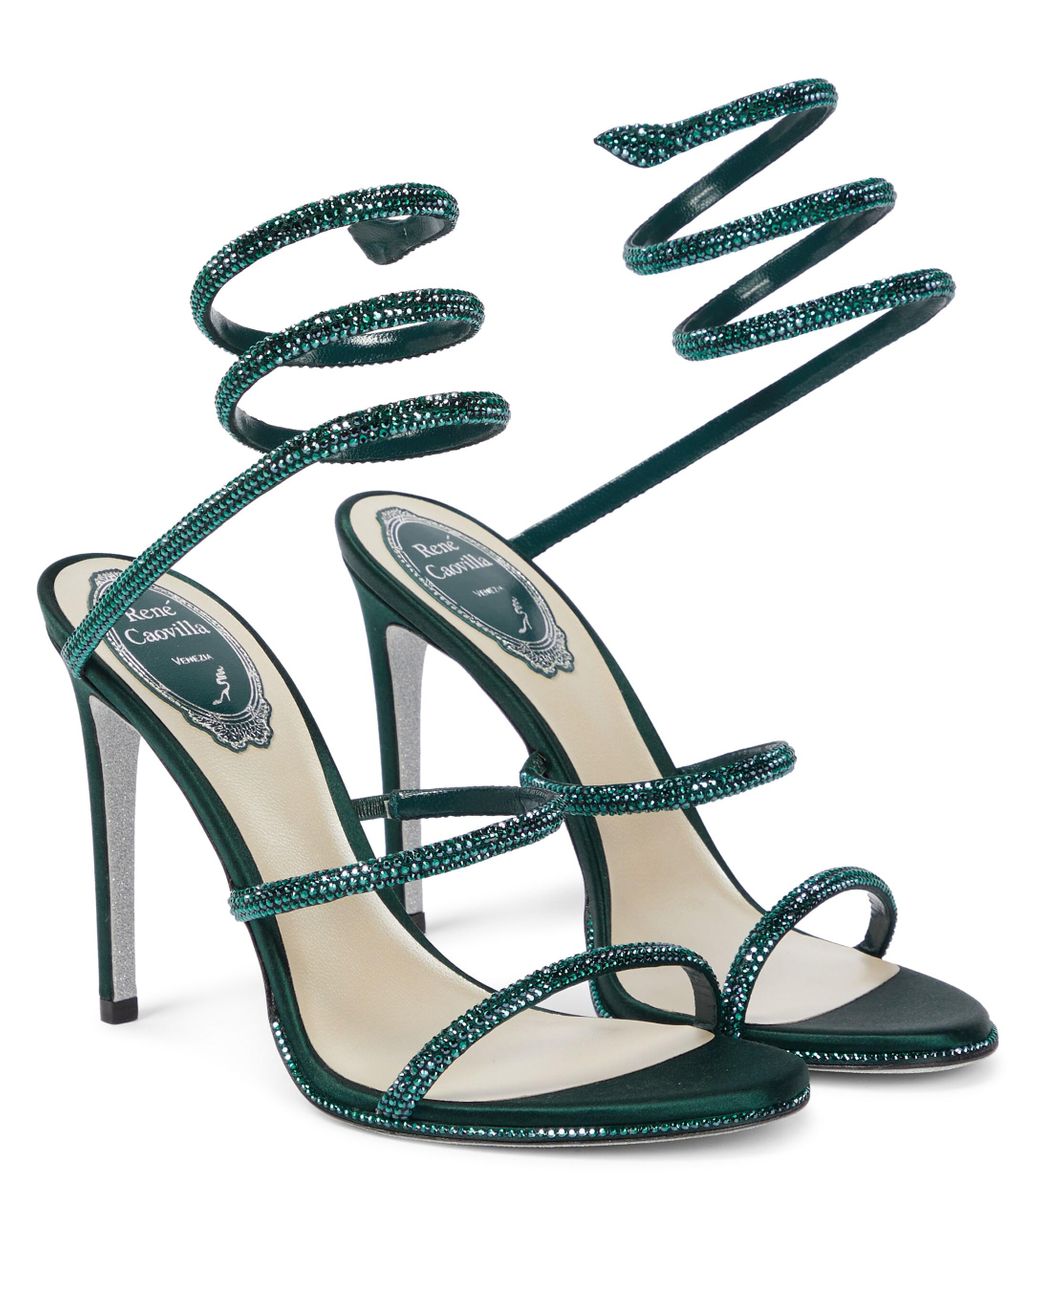 Rene Caovilla Cleo Embellished Leather Sandals in Green | Lyst